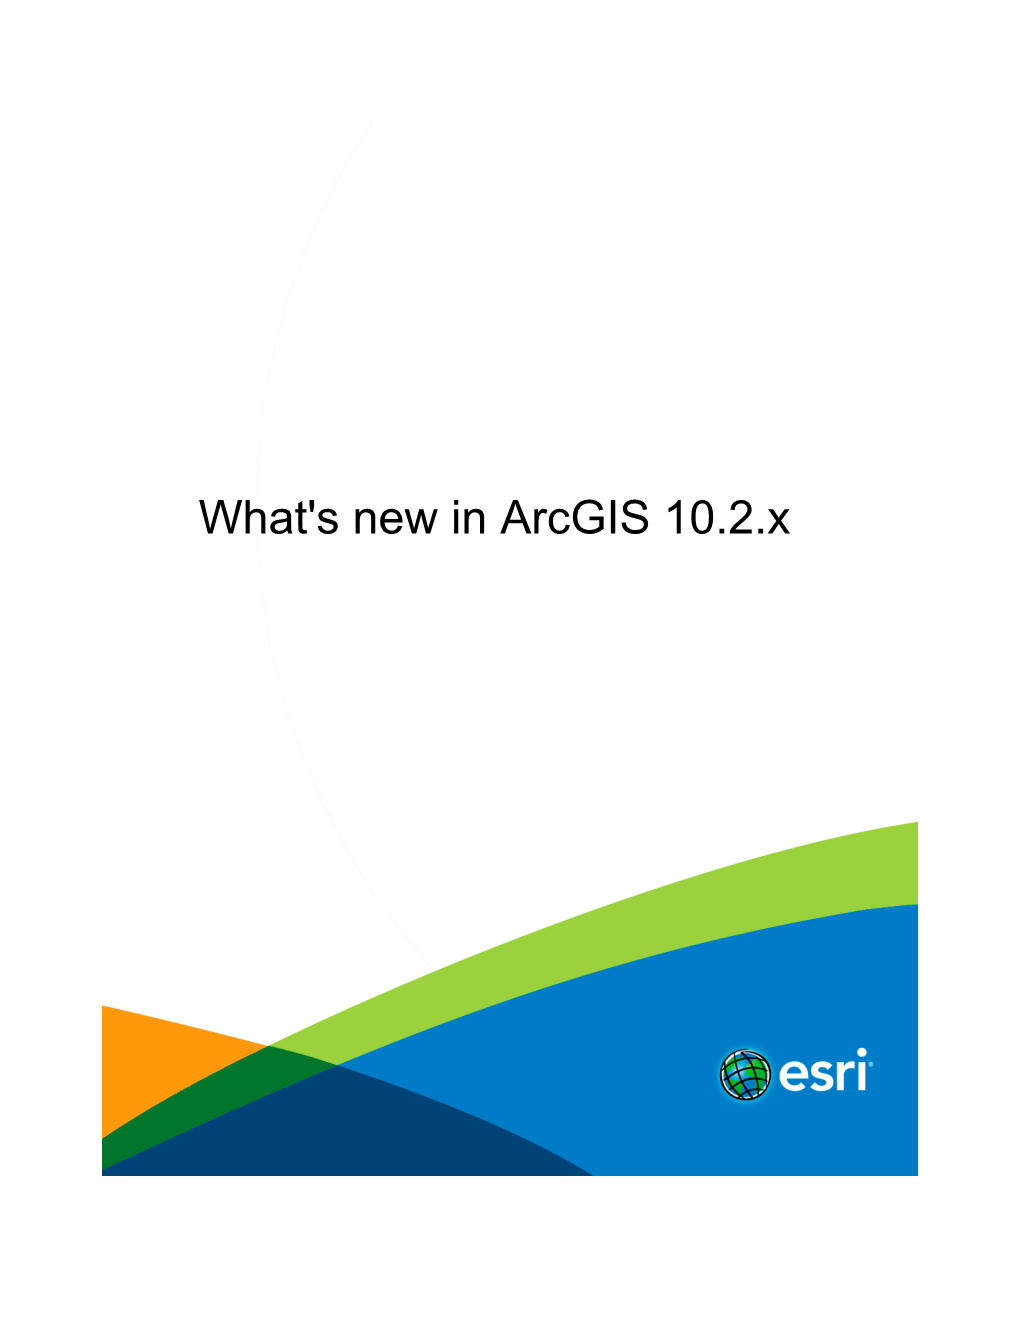 What's New in Arcgis 10.2.X